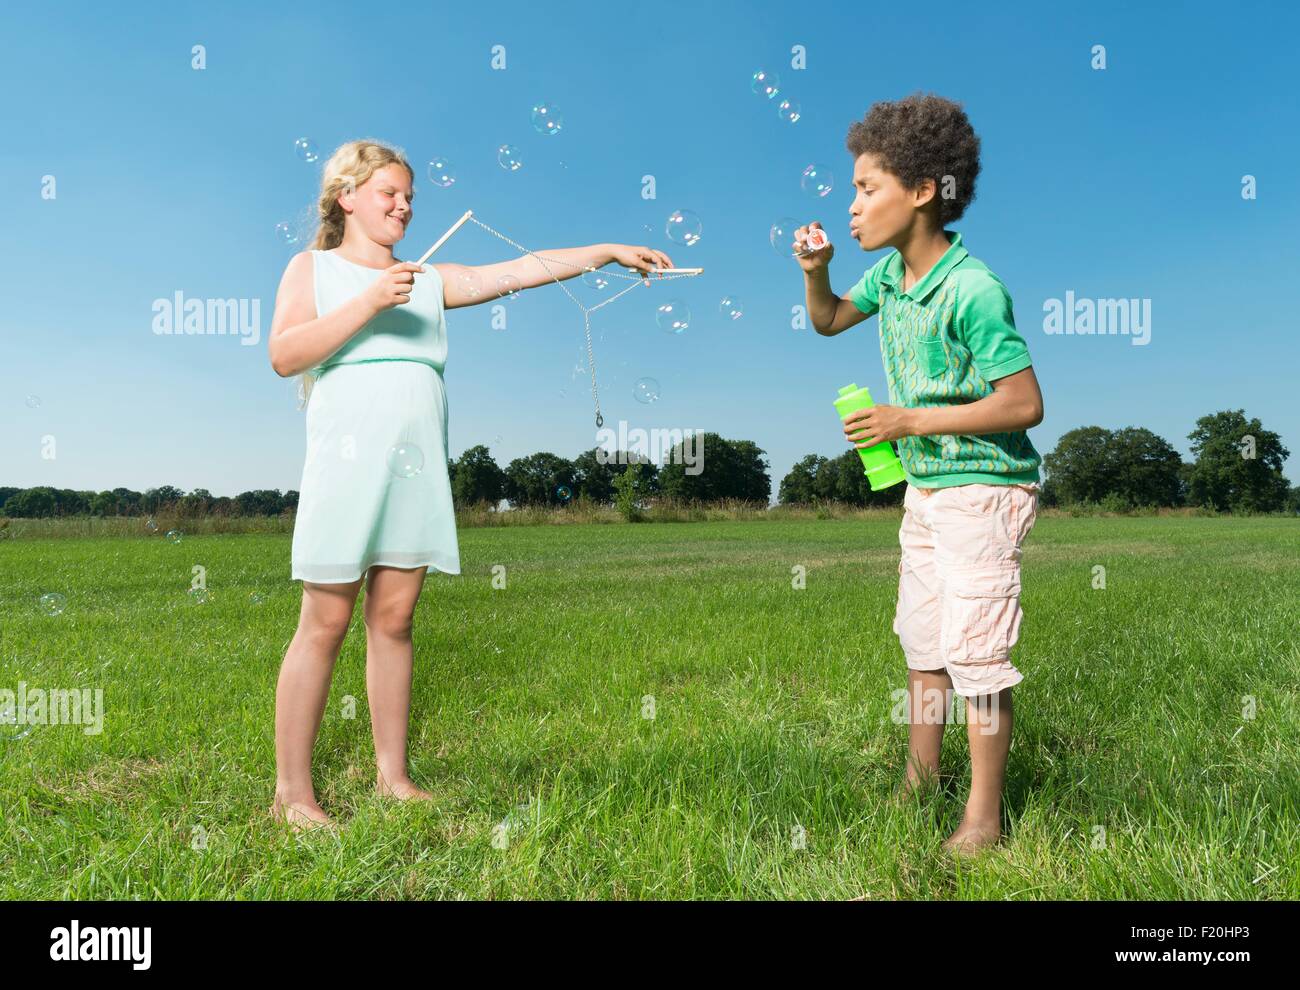 Girl and boy blowing bubbles in field Stock Photo